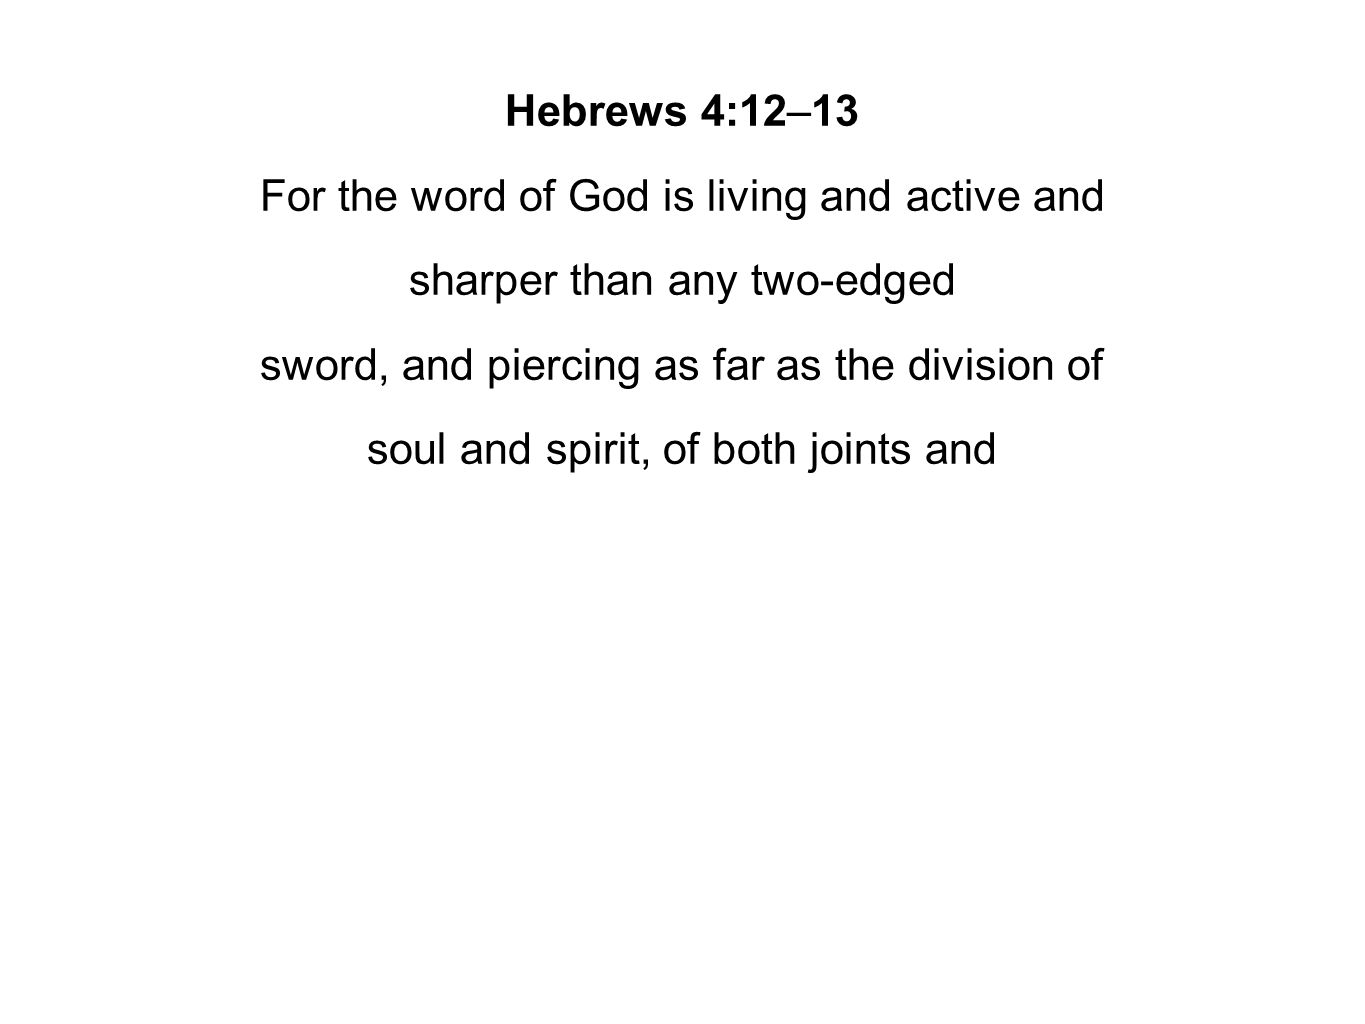 Hebrews 4:12–13 For the word of God is living and active and sharper than any two-edged sword, and piercing as far as the division of soul and spirit, of both joints and